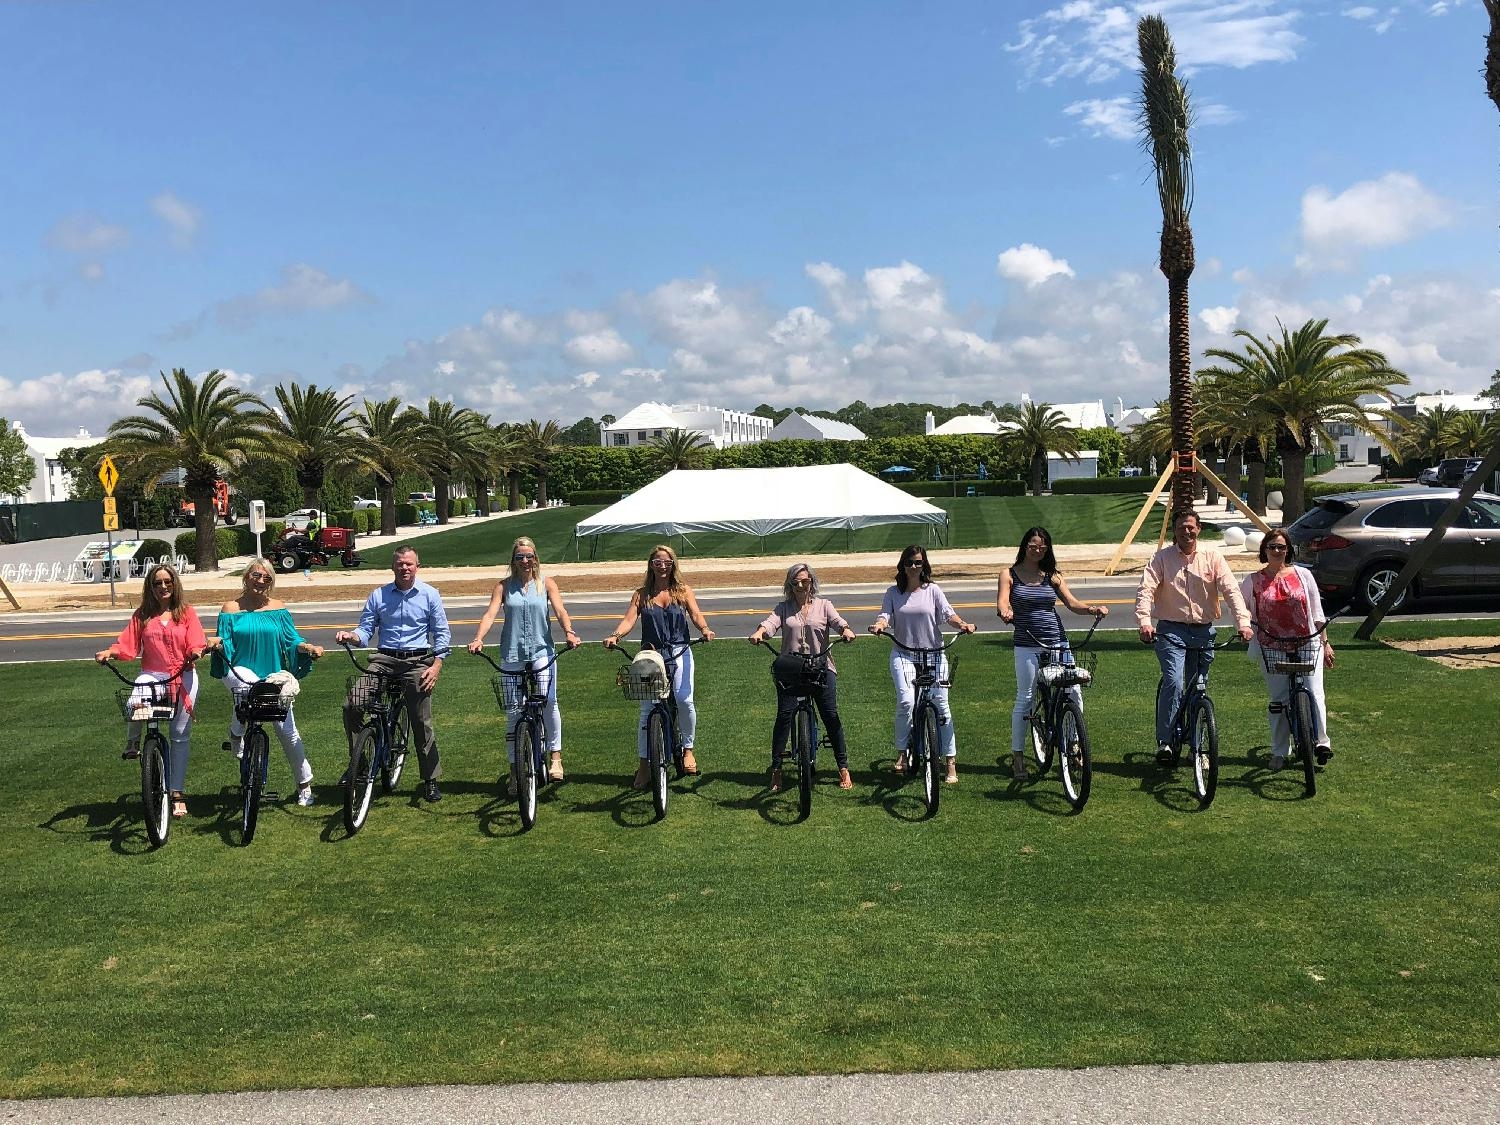 The Sales Team is taking a break during our Annual Sales Meeting in Alys Beach, Florida